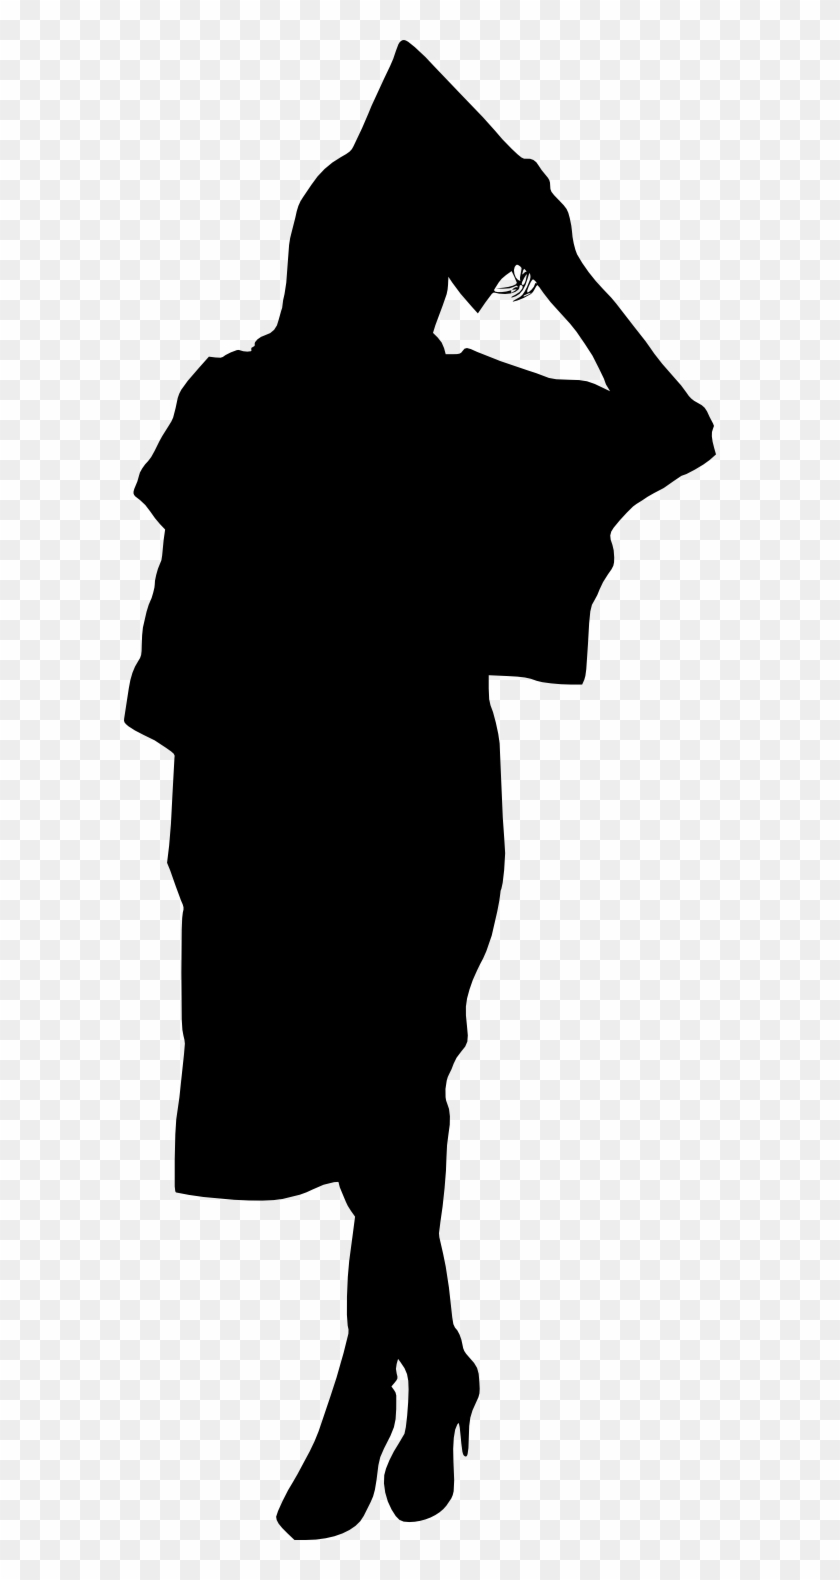 Free Download - Employee Silhouette #926994